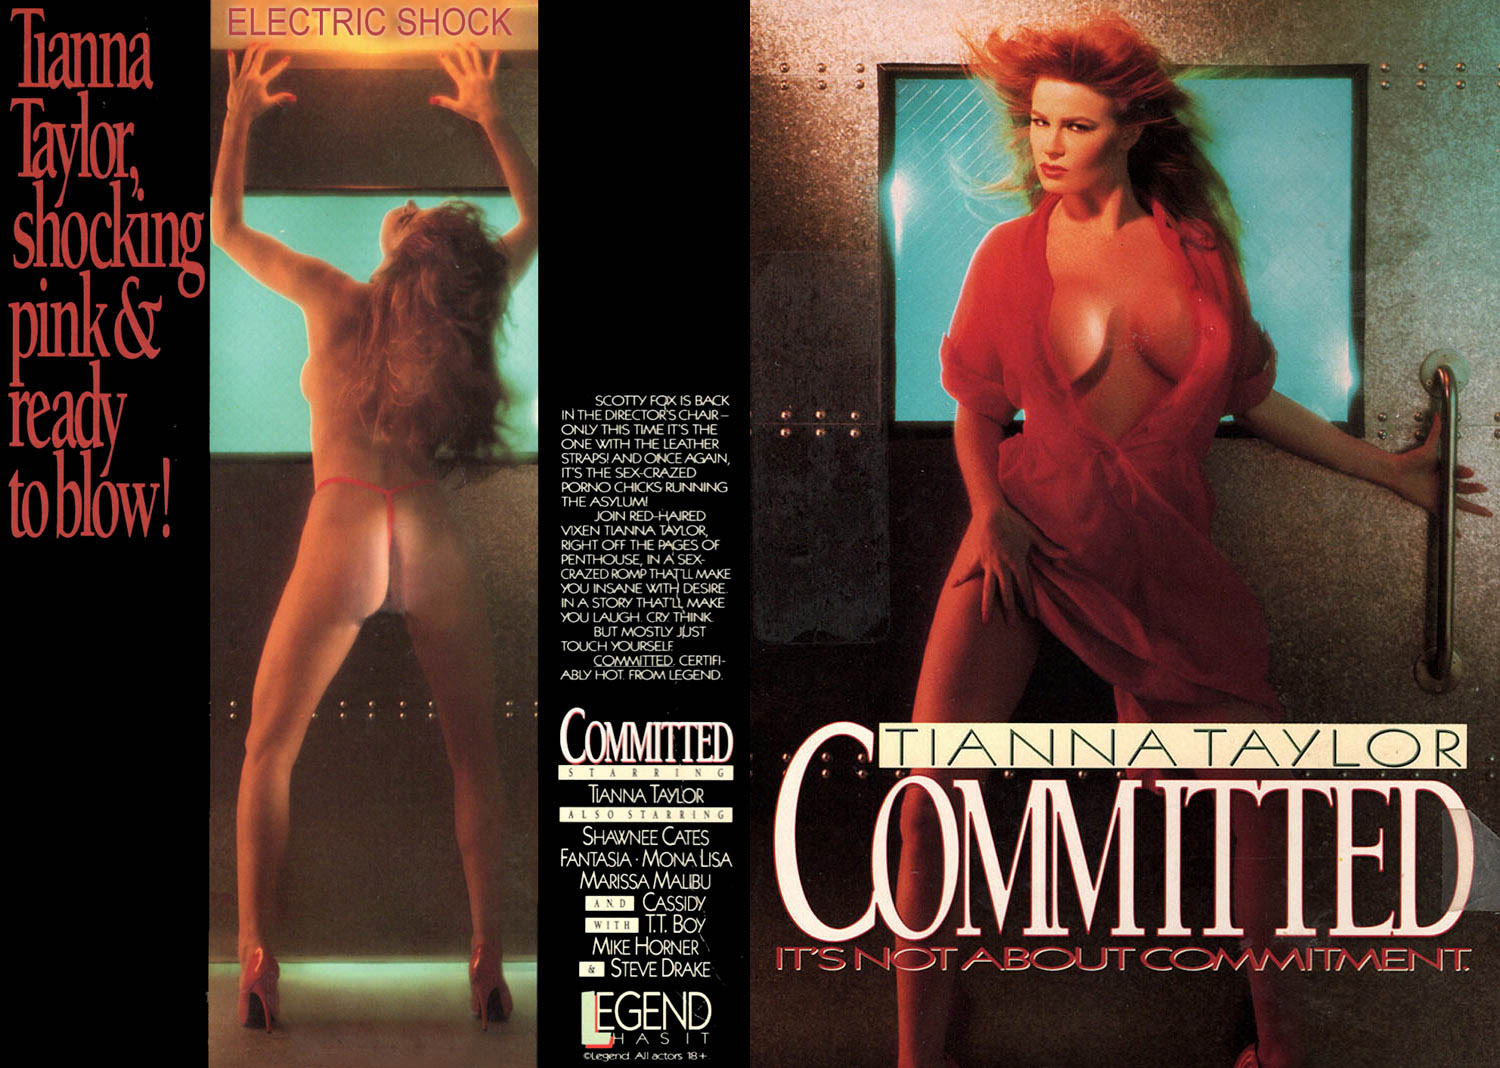 Committed - 1992 - Scotty Fox